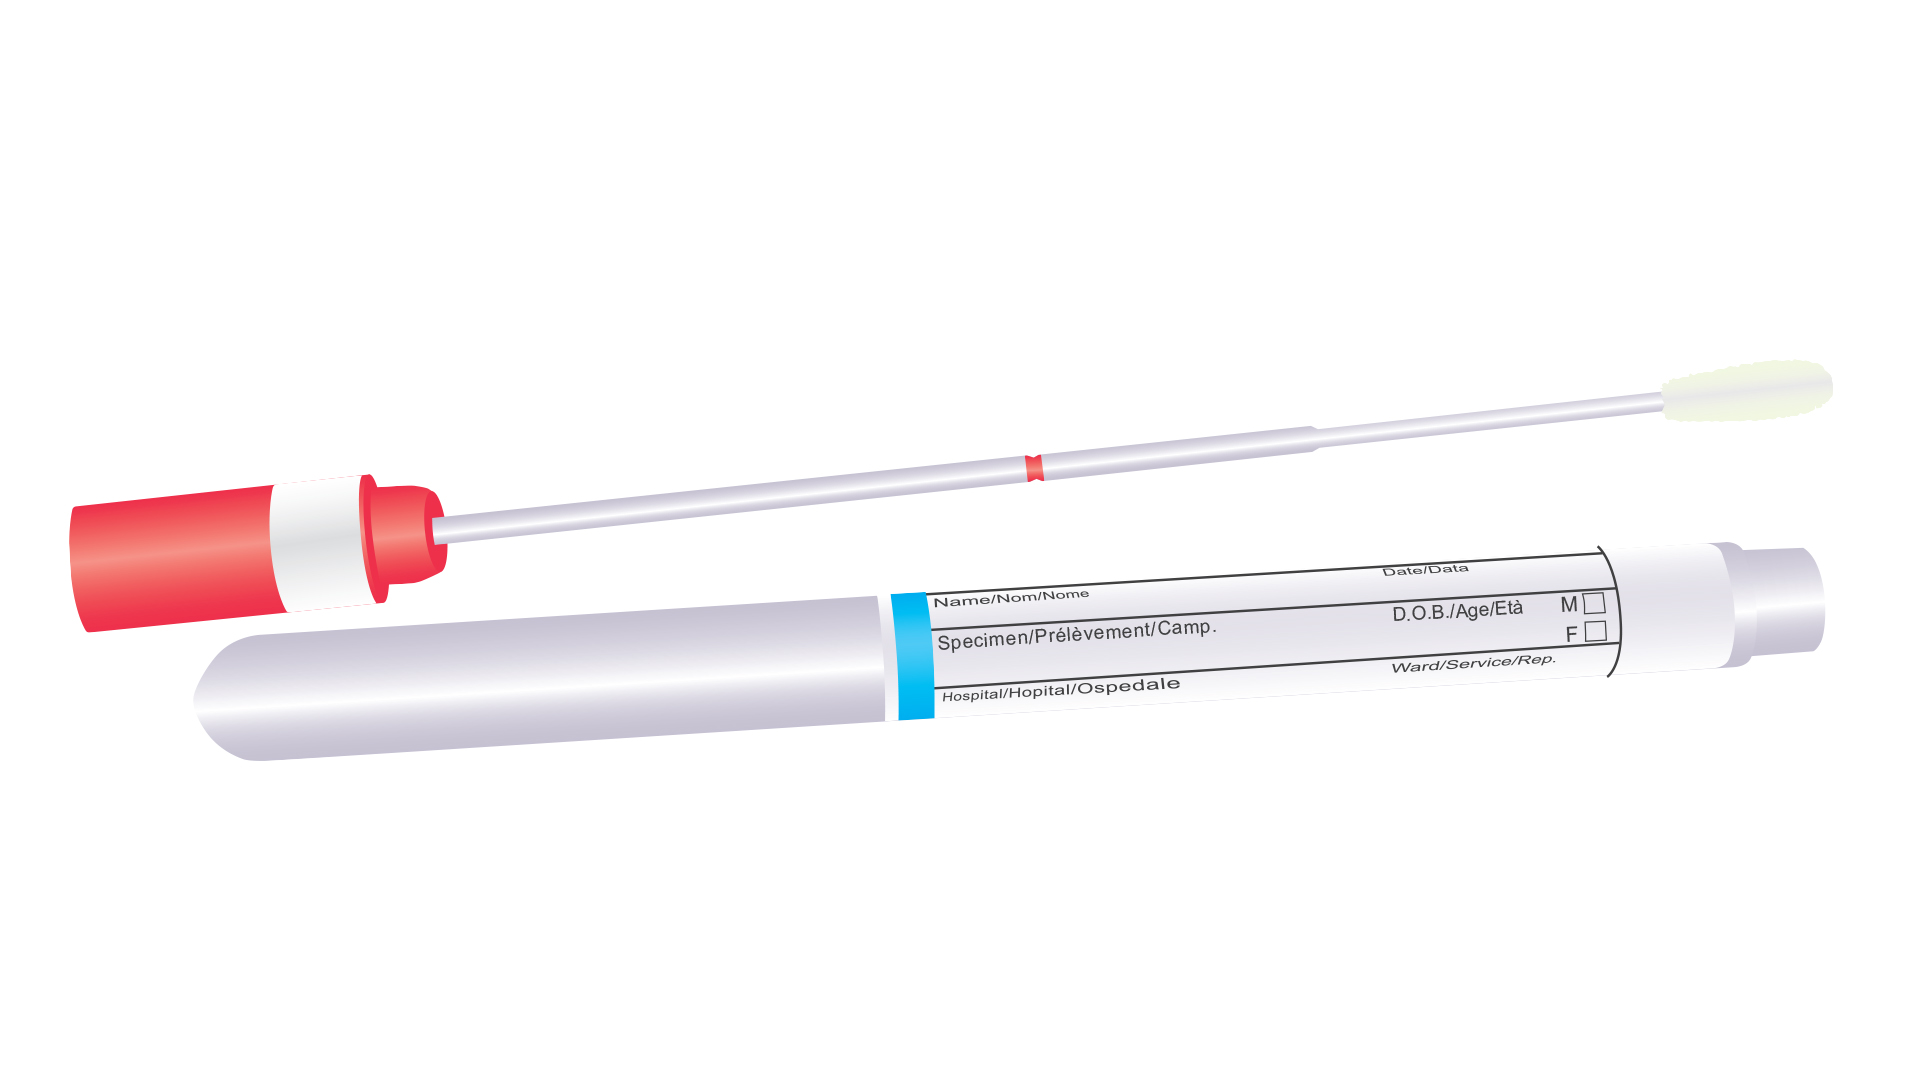 Self-collection swab and tube